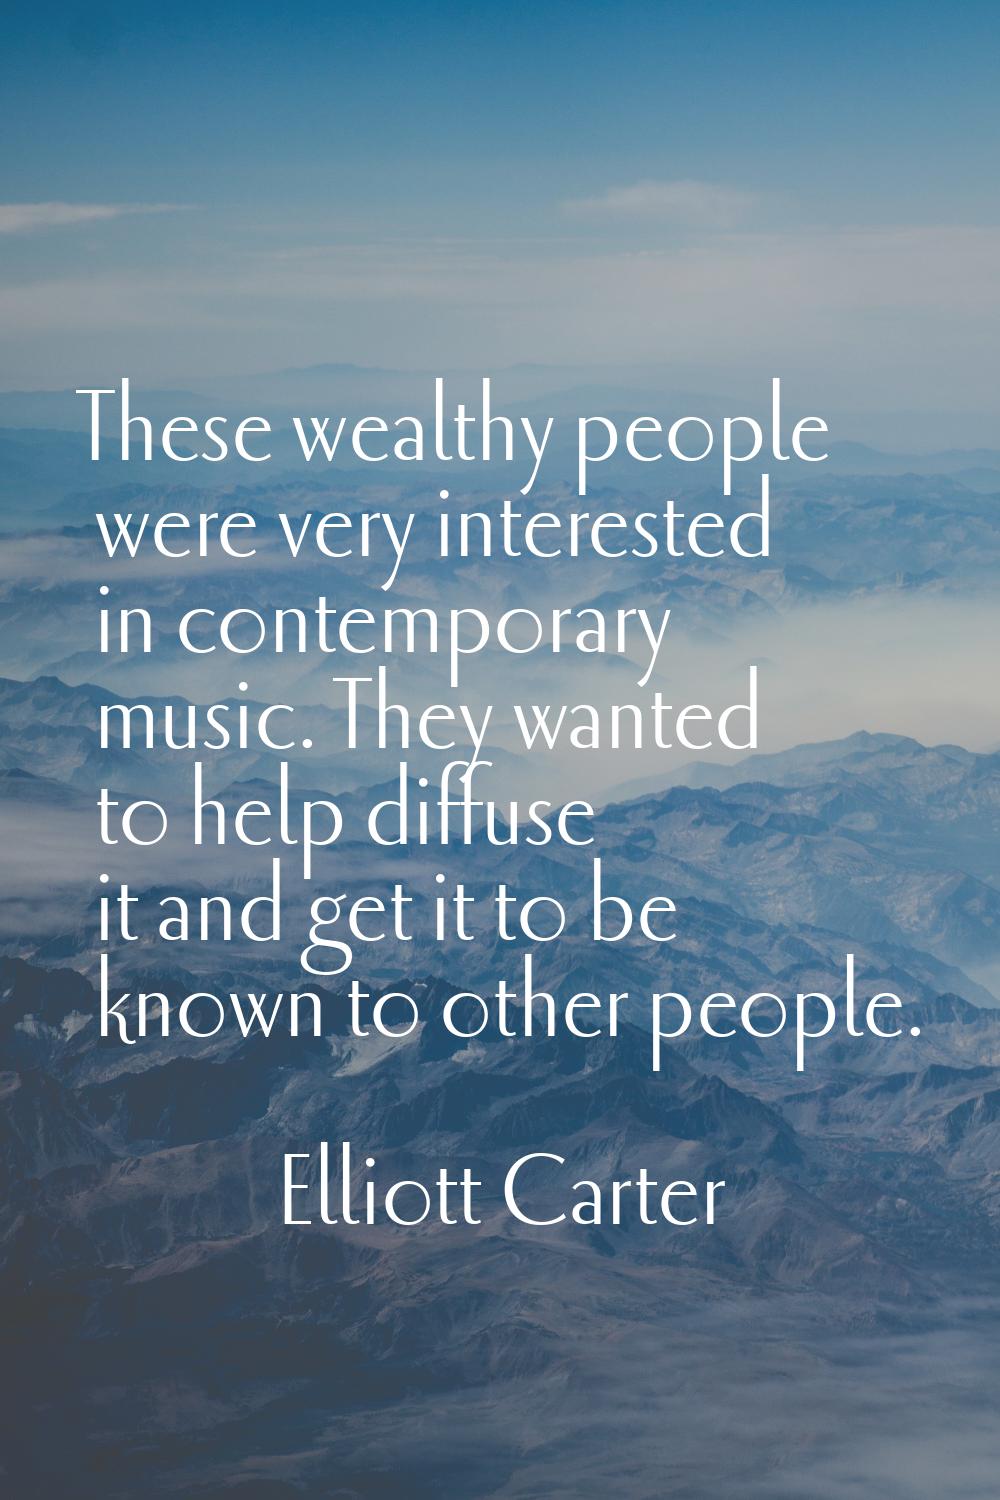 These wealthy people were very interested in contemporary music. They wanted to help diffuse it and